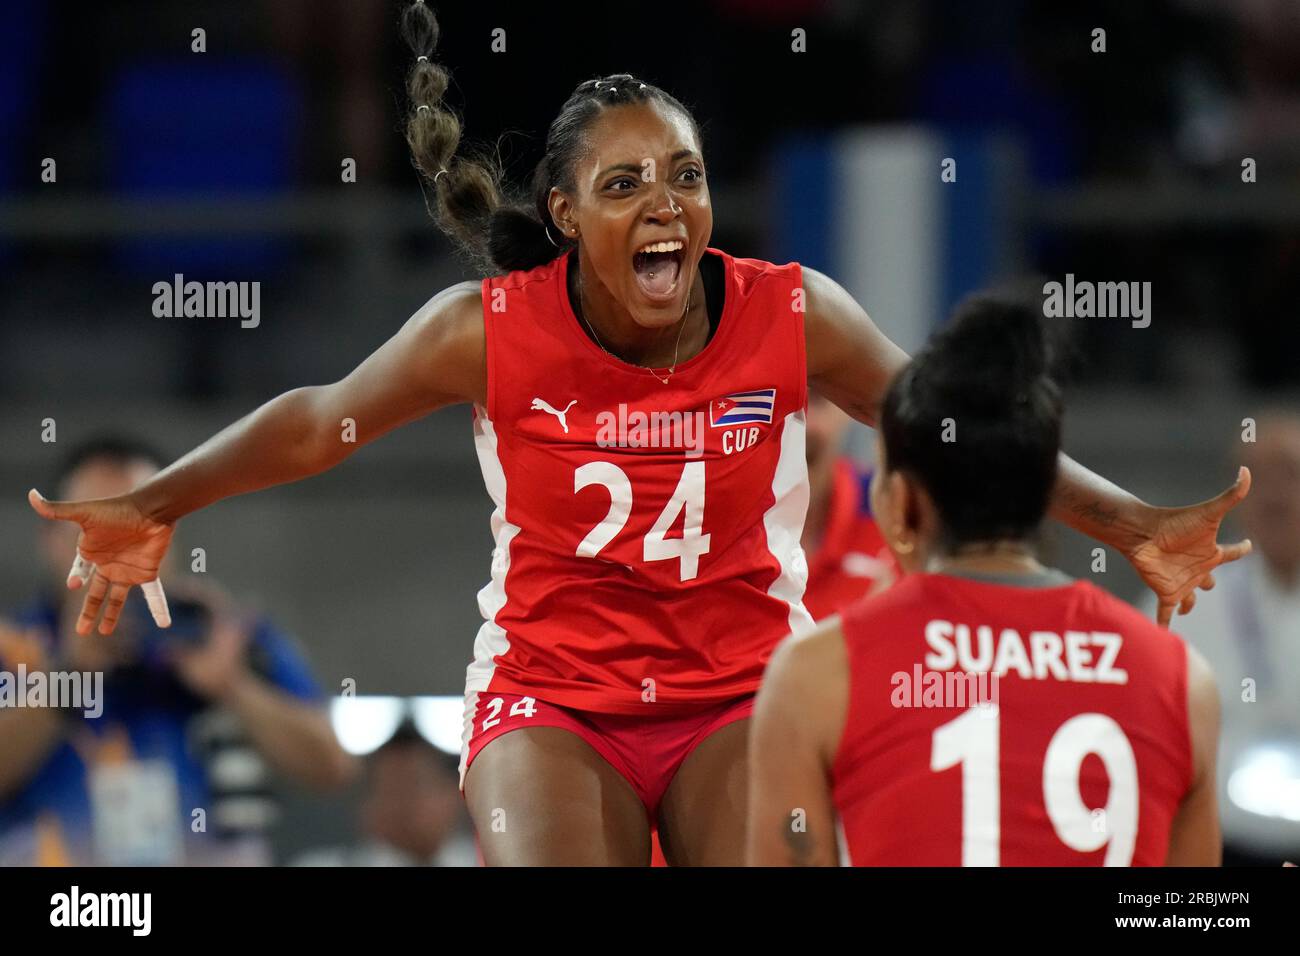 Cuba's Thalia Morenos celebrates with teammate Laura Suarez, their victory  over Colombia, at the end of the women's volleyball team final for the  bronze medal, at the Central American and Caribbean Games